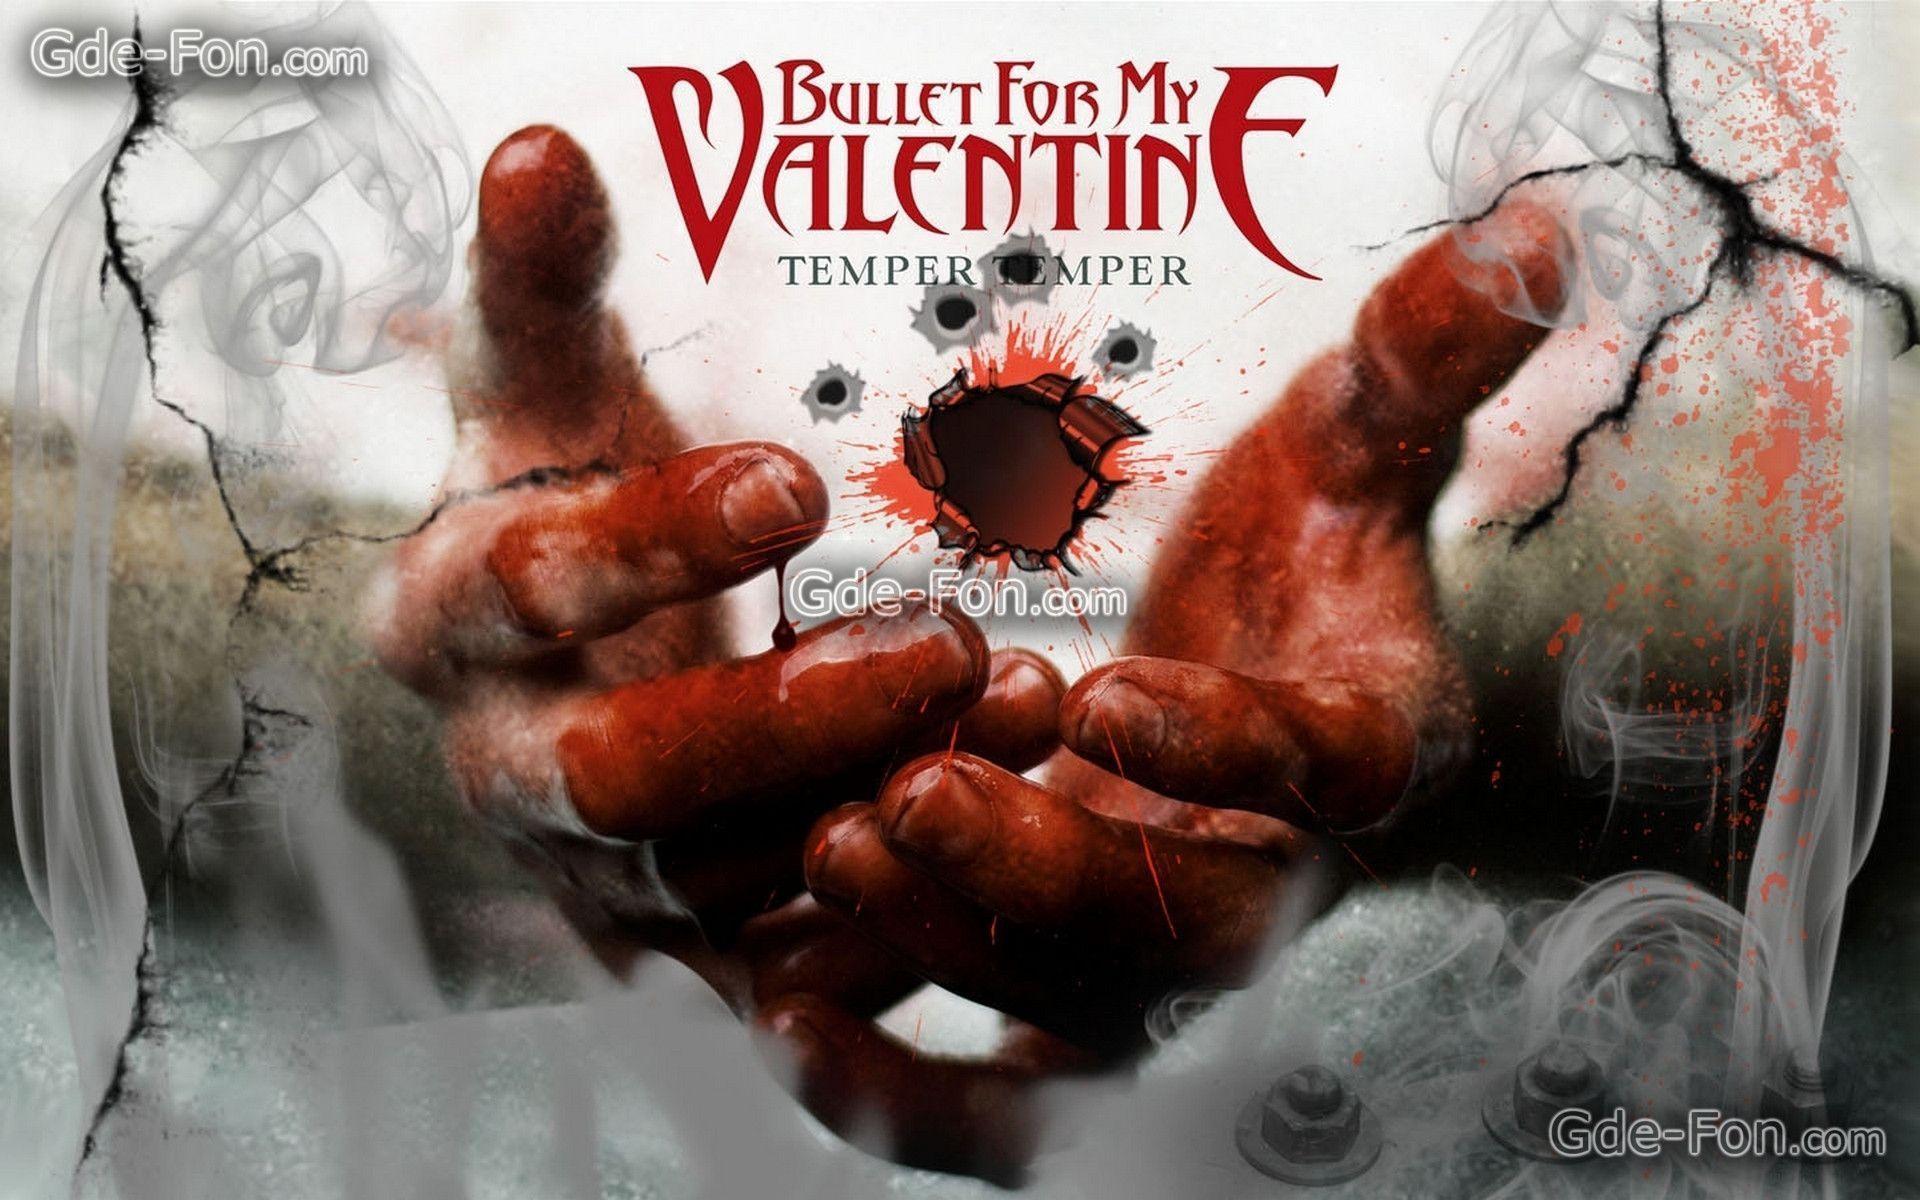 Download wallpaper music, group, bullet for my valentine, album